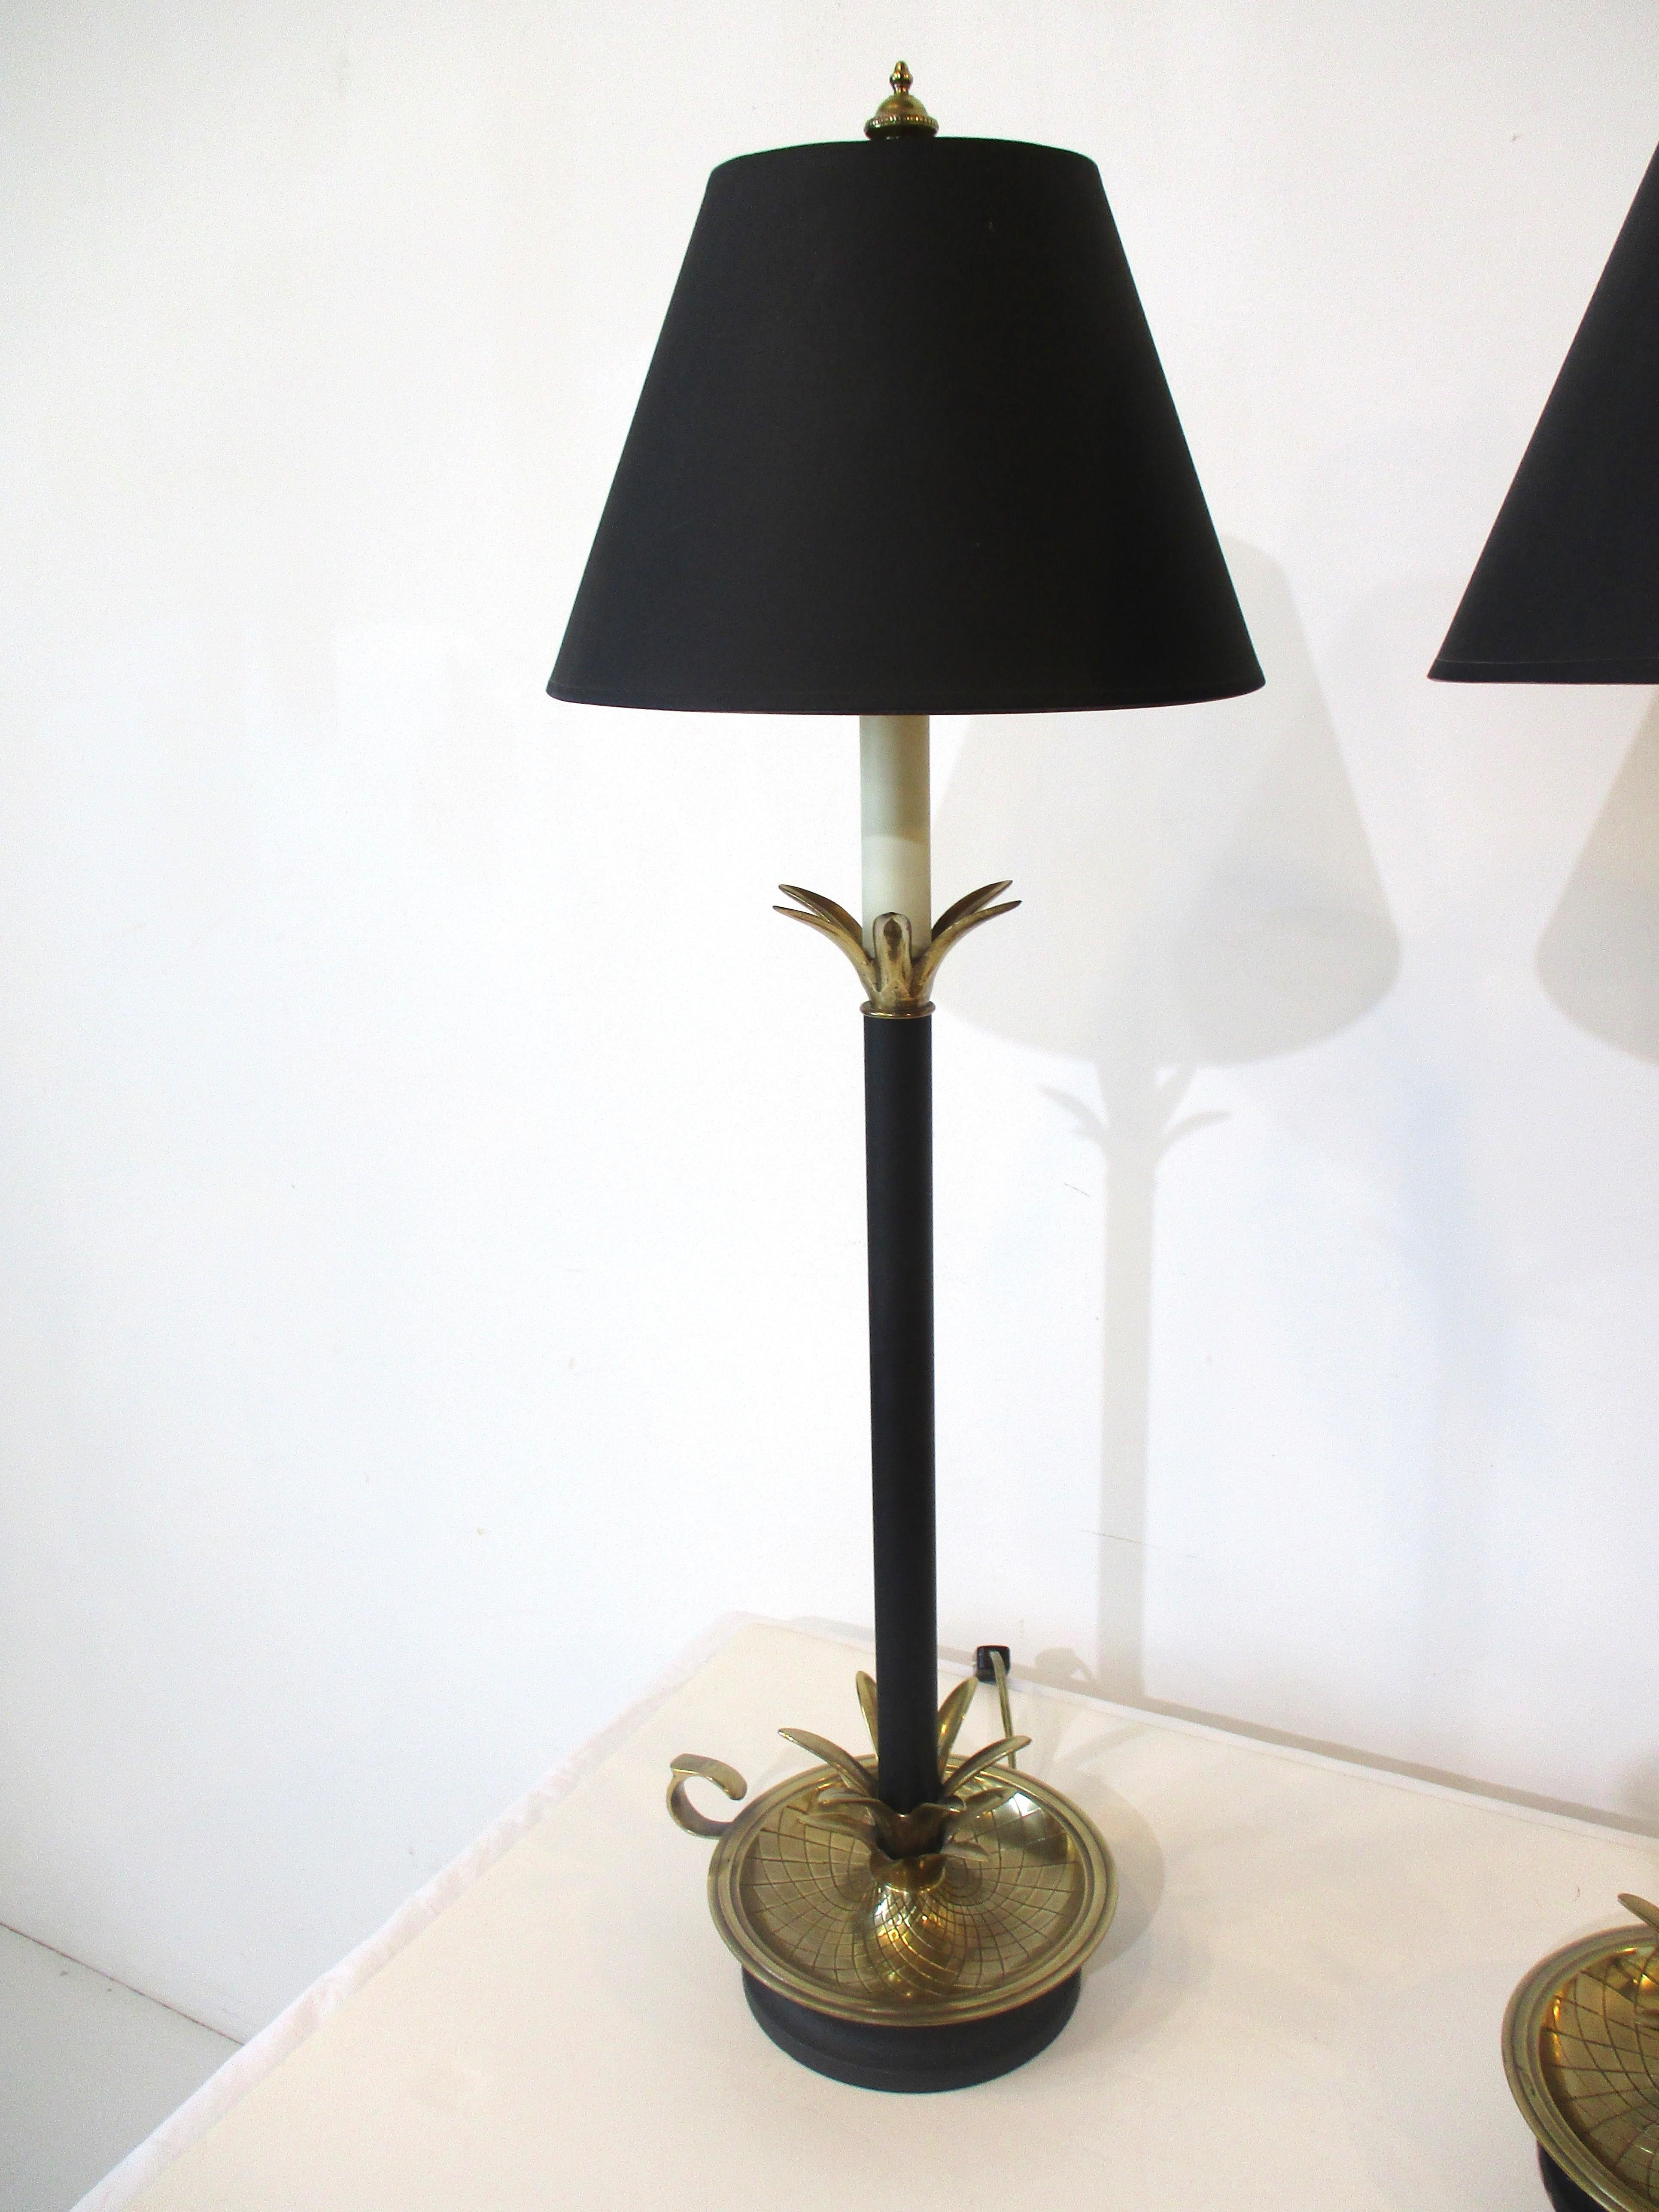 A pair of Regency styled Palm tree table lamps with satin black shades having gold toning to the inside . The solid brass leaves and base with details etched to the surface and the candlestick style make for a very well crafted and tight elegant